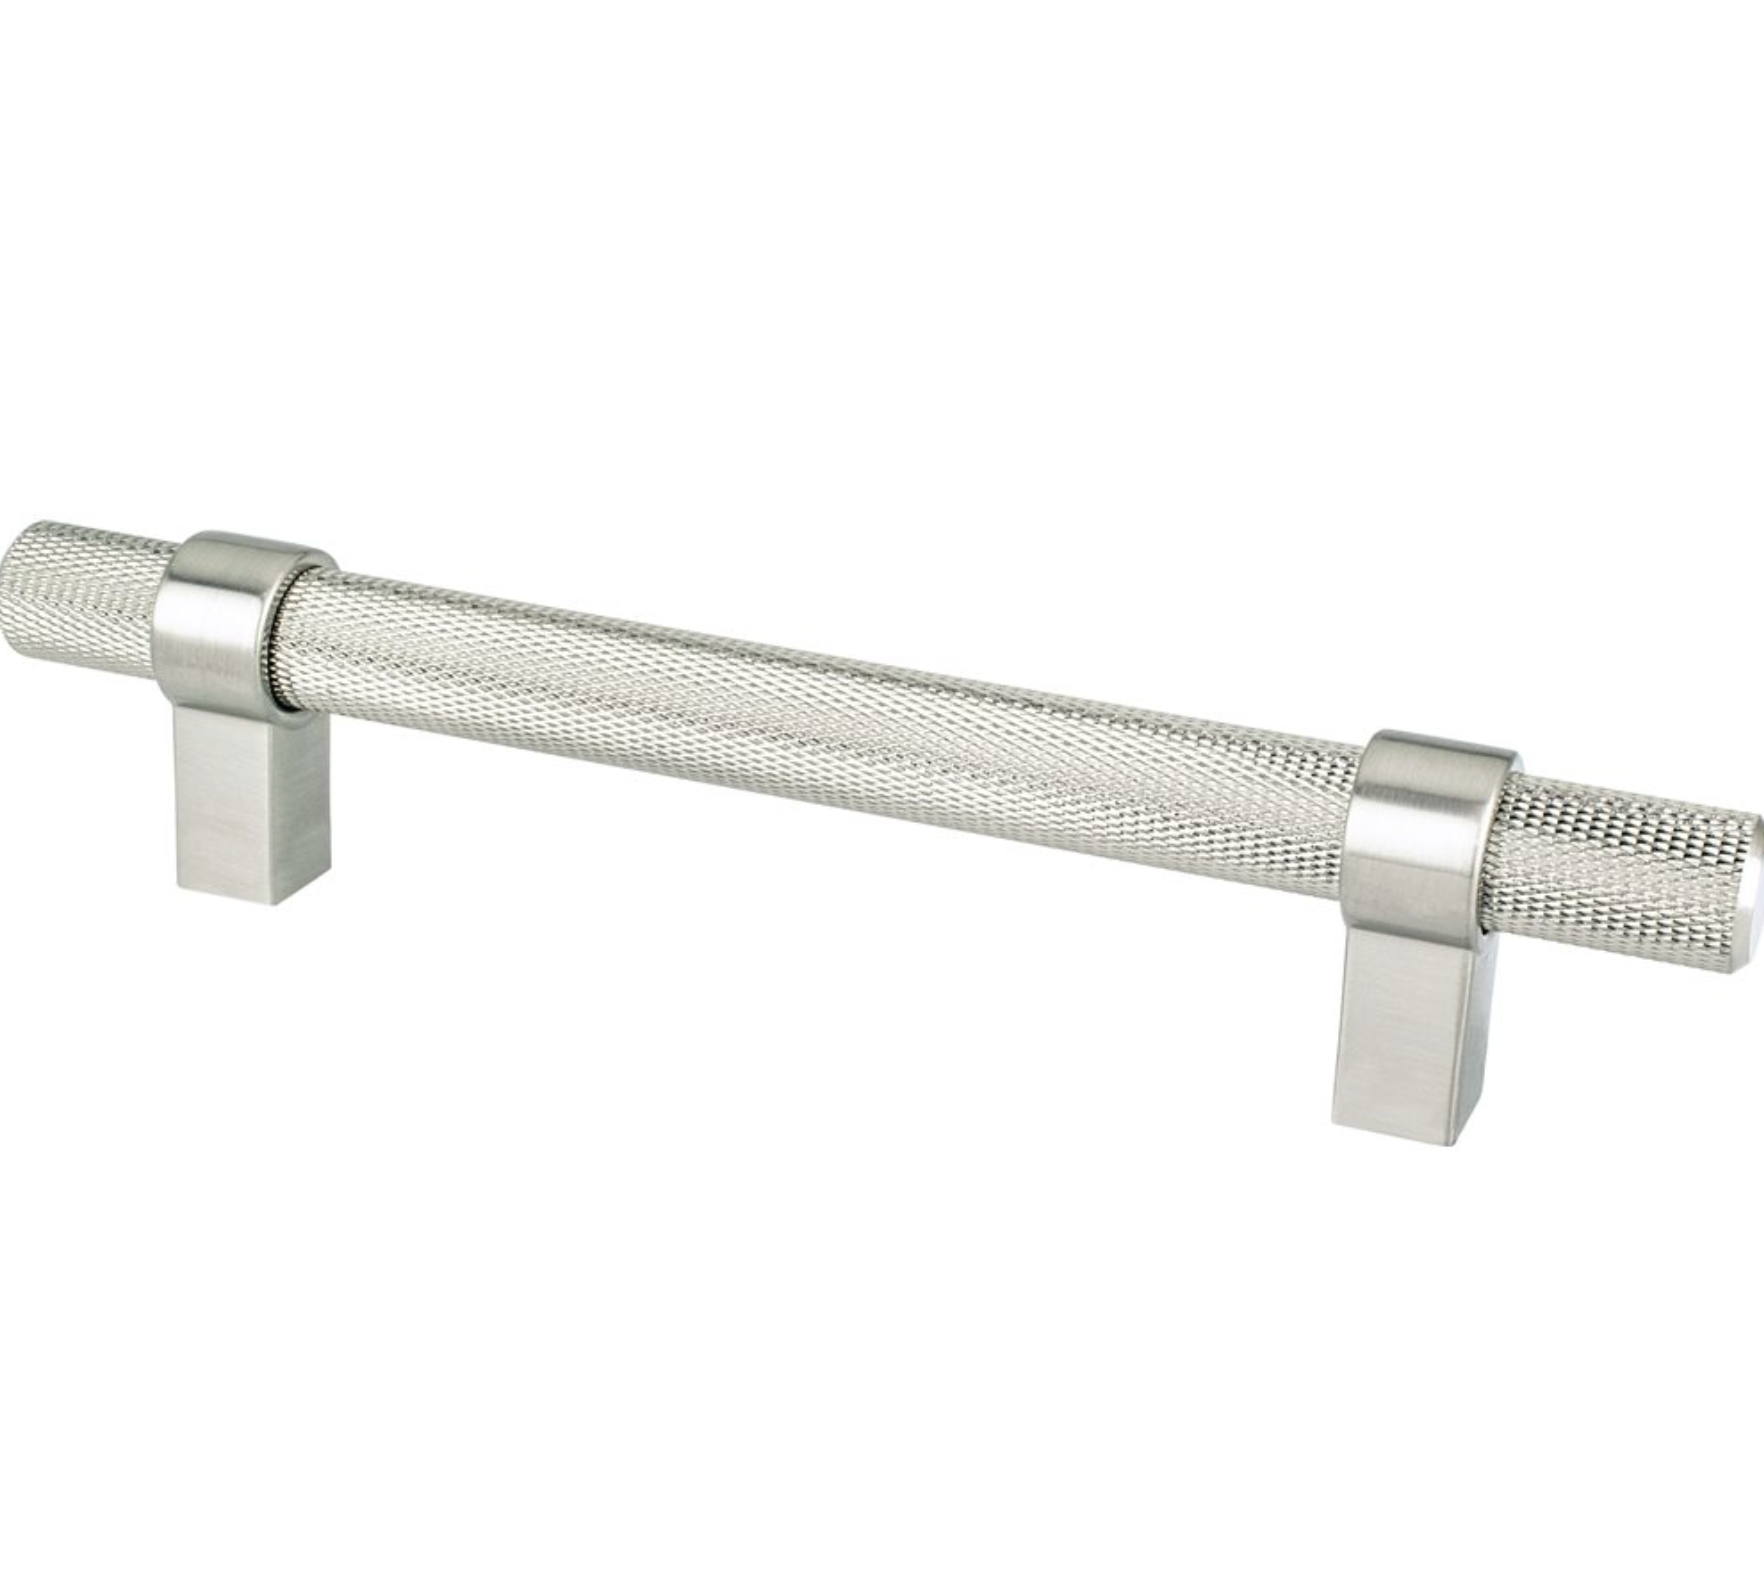 Knurled "Prelude" Brushed Nickel Cabinet Knobs and Drawer Pulls - Industry Hardware